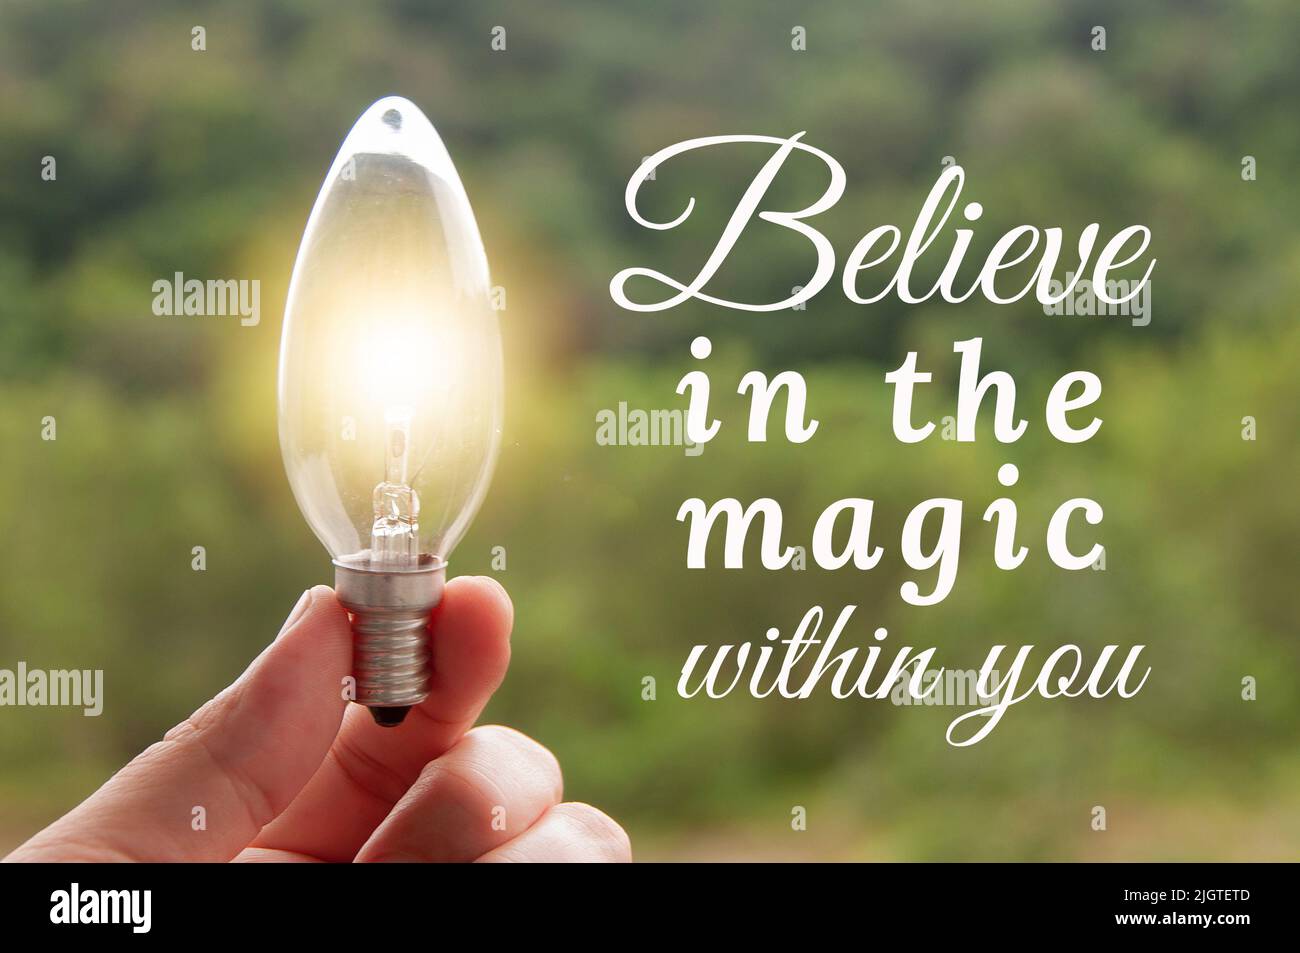 Motivational and Inspirational quote - Believe in the magic within you. Hand holding light bulb with blurred background. Motivational concept Stock Photo